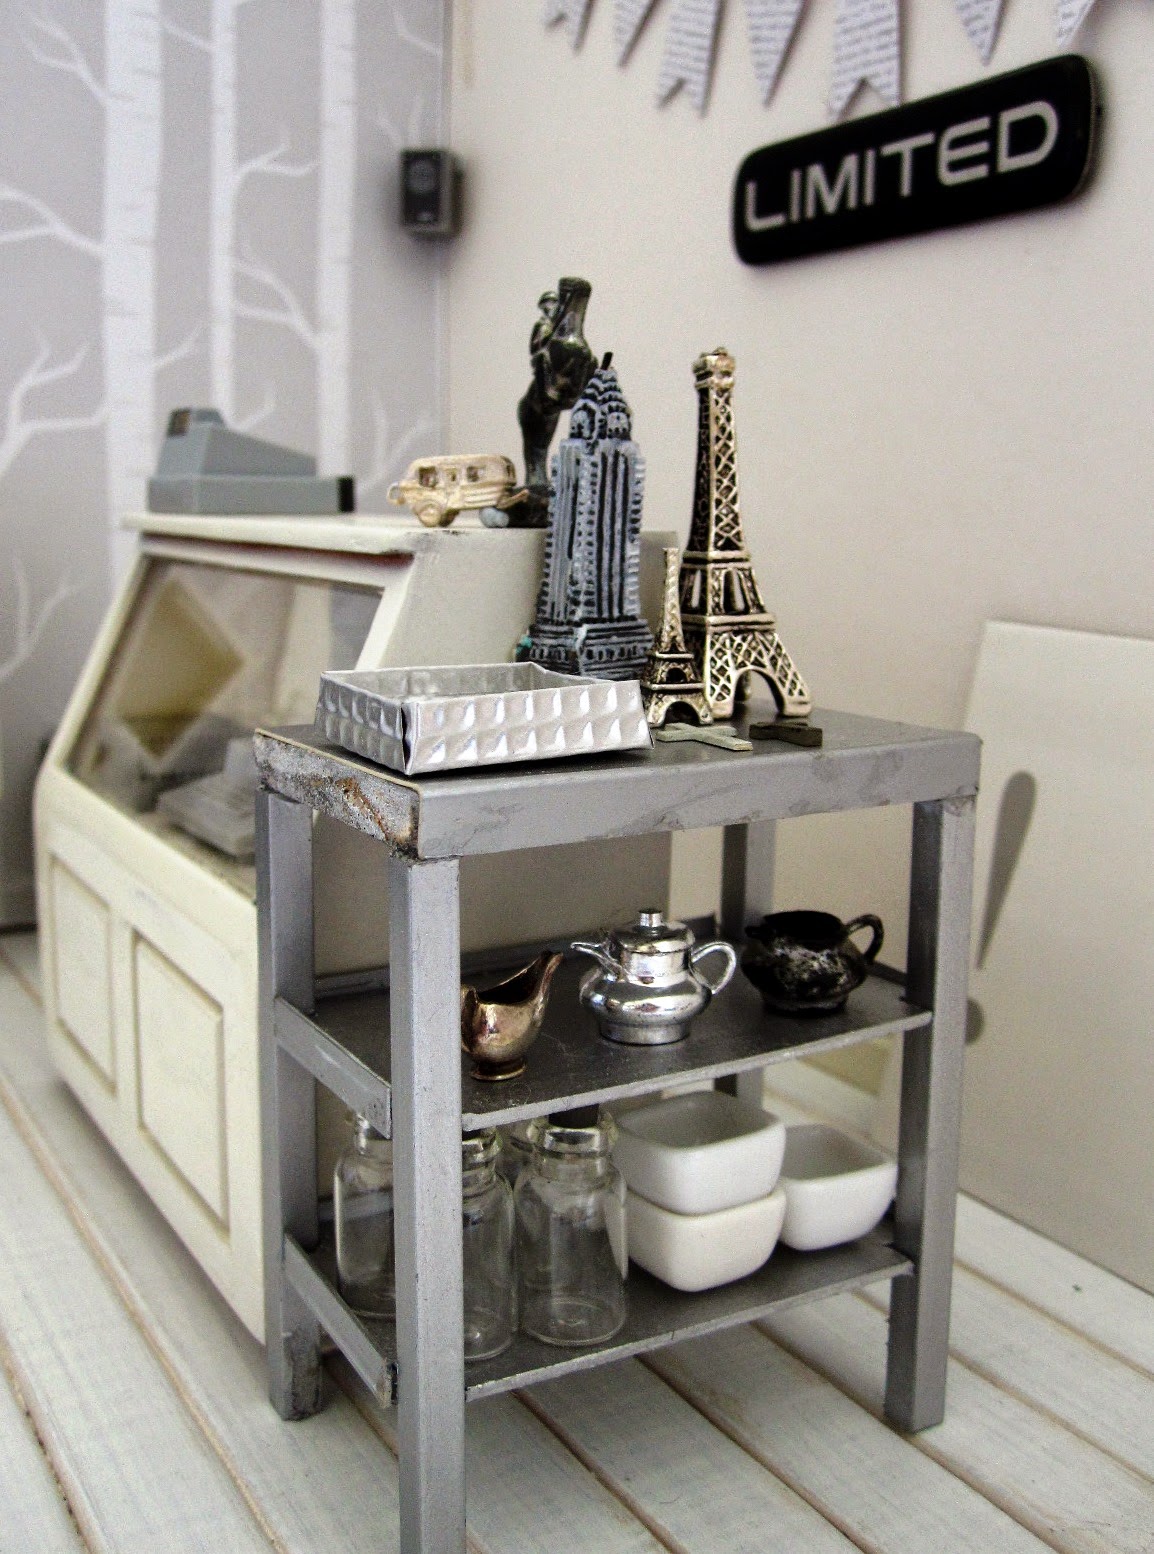 Counter area of a modern dolls' house miniature homeware shop in grey and white. On the counter is a cash register and two silver statues. To the right of the counter is a grey metal shelving unit displaying a selection of model buildings, a range of vintage silver jugs and a number of empty bottles and white bowls.